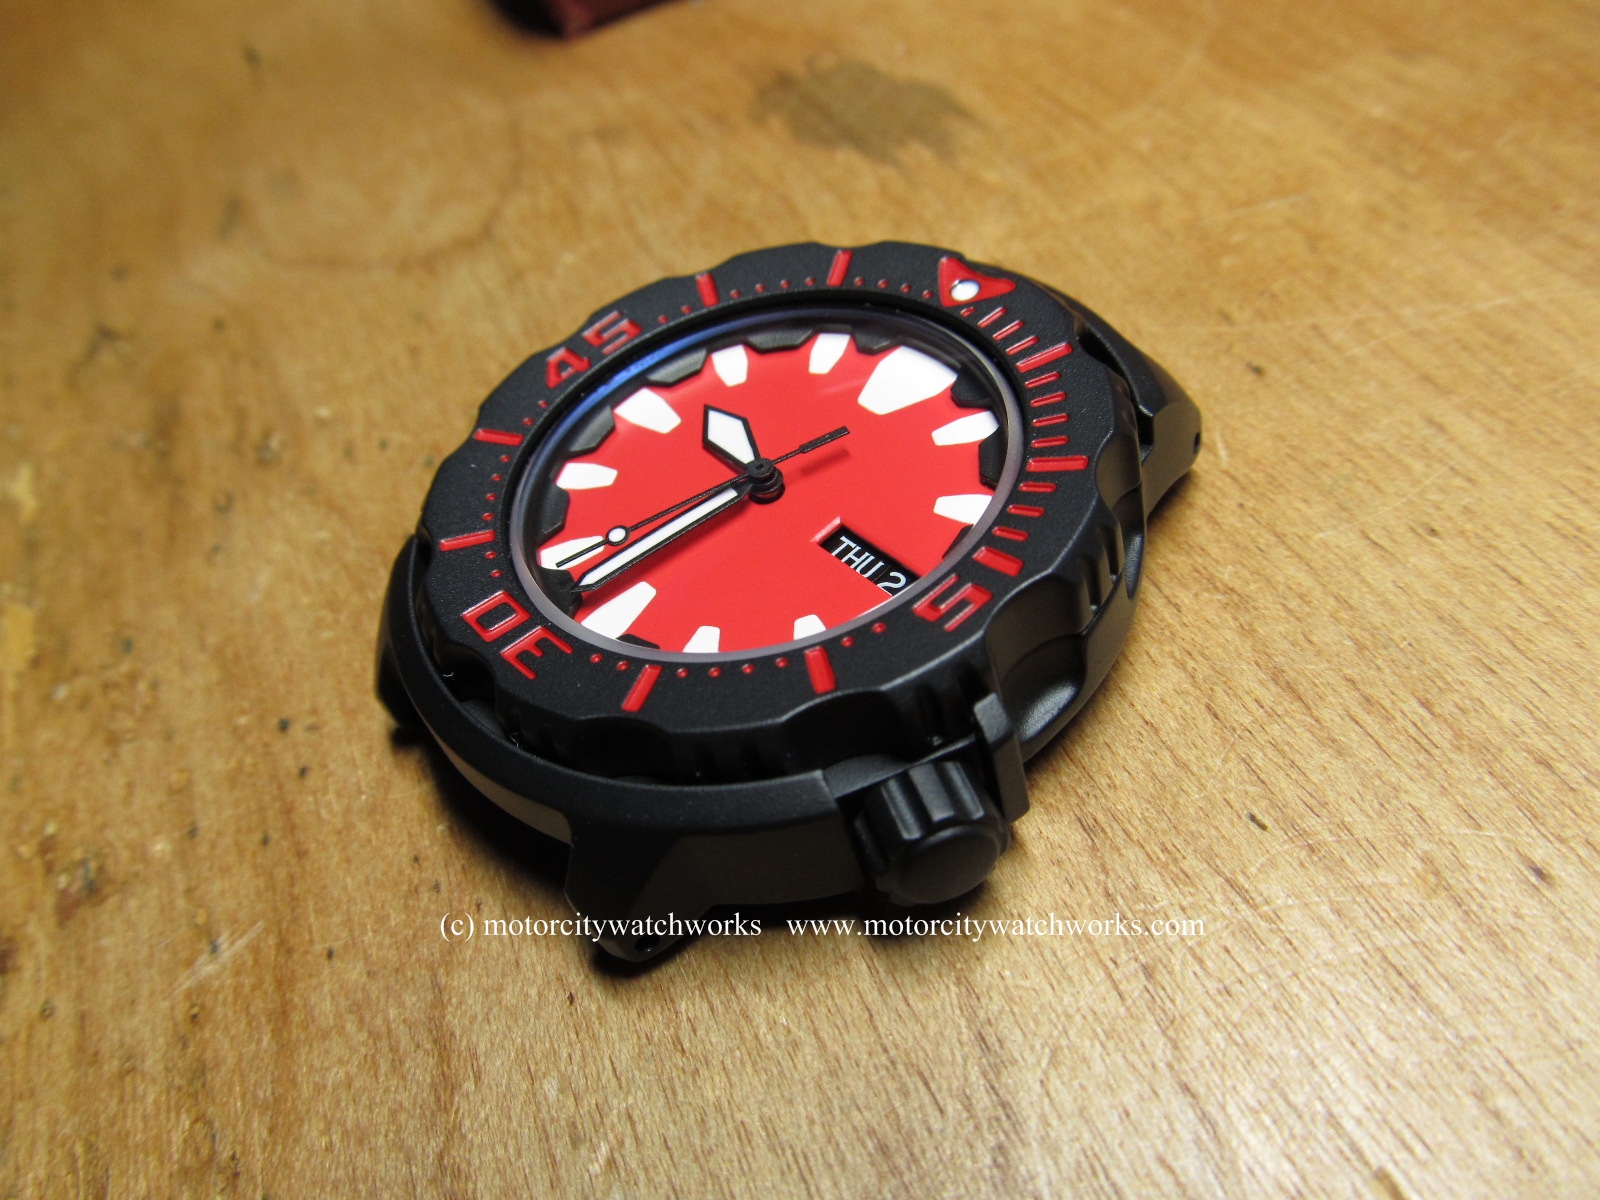 MotorCity WatchWorks | Our Work